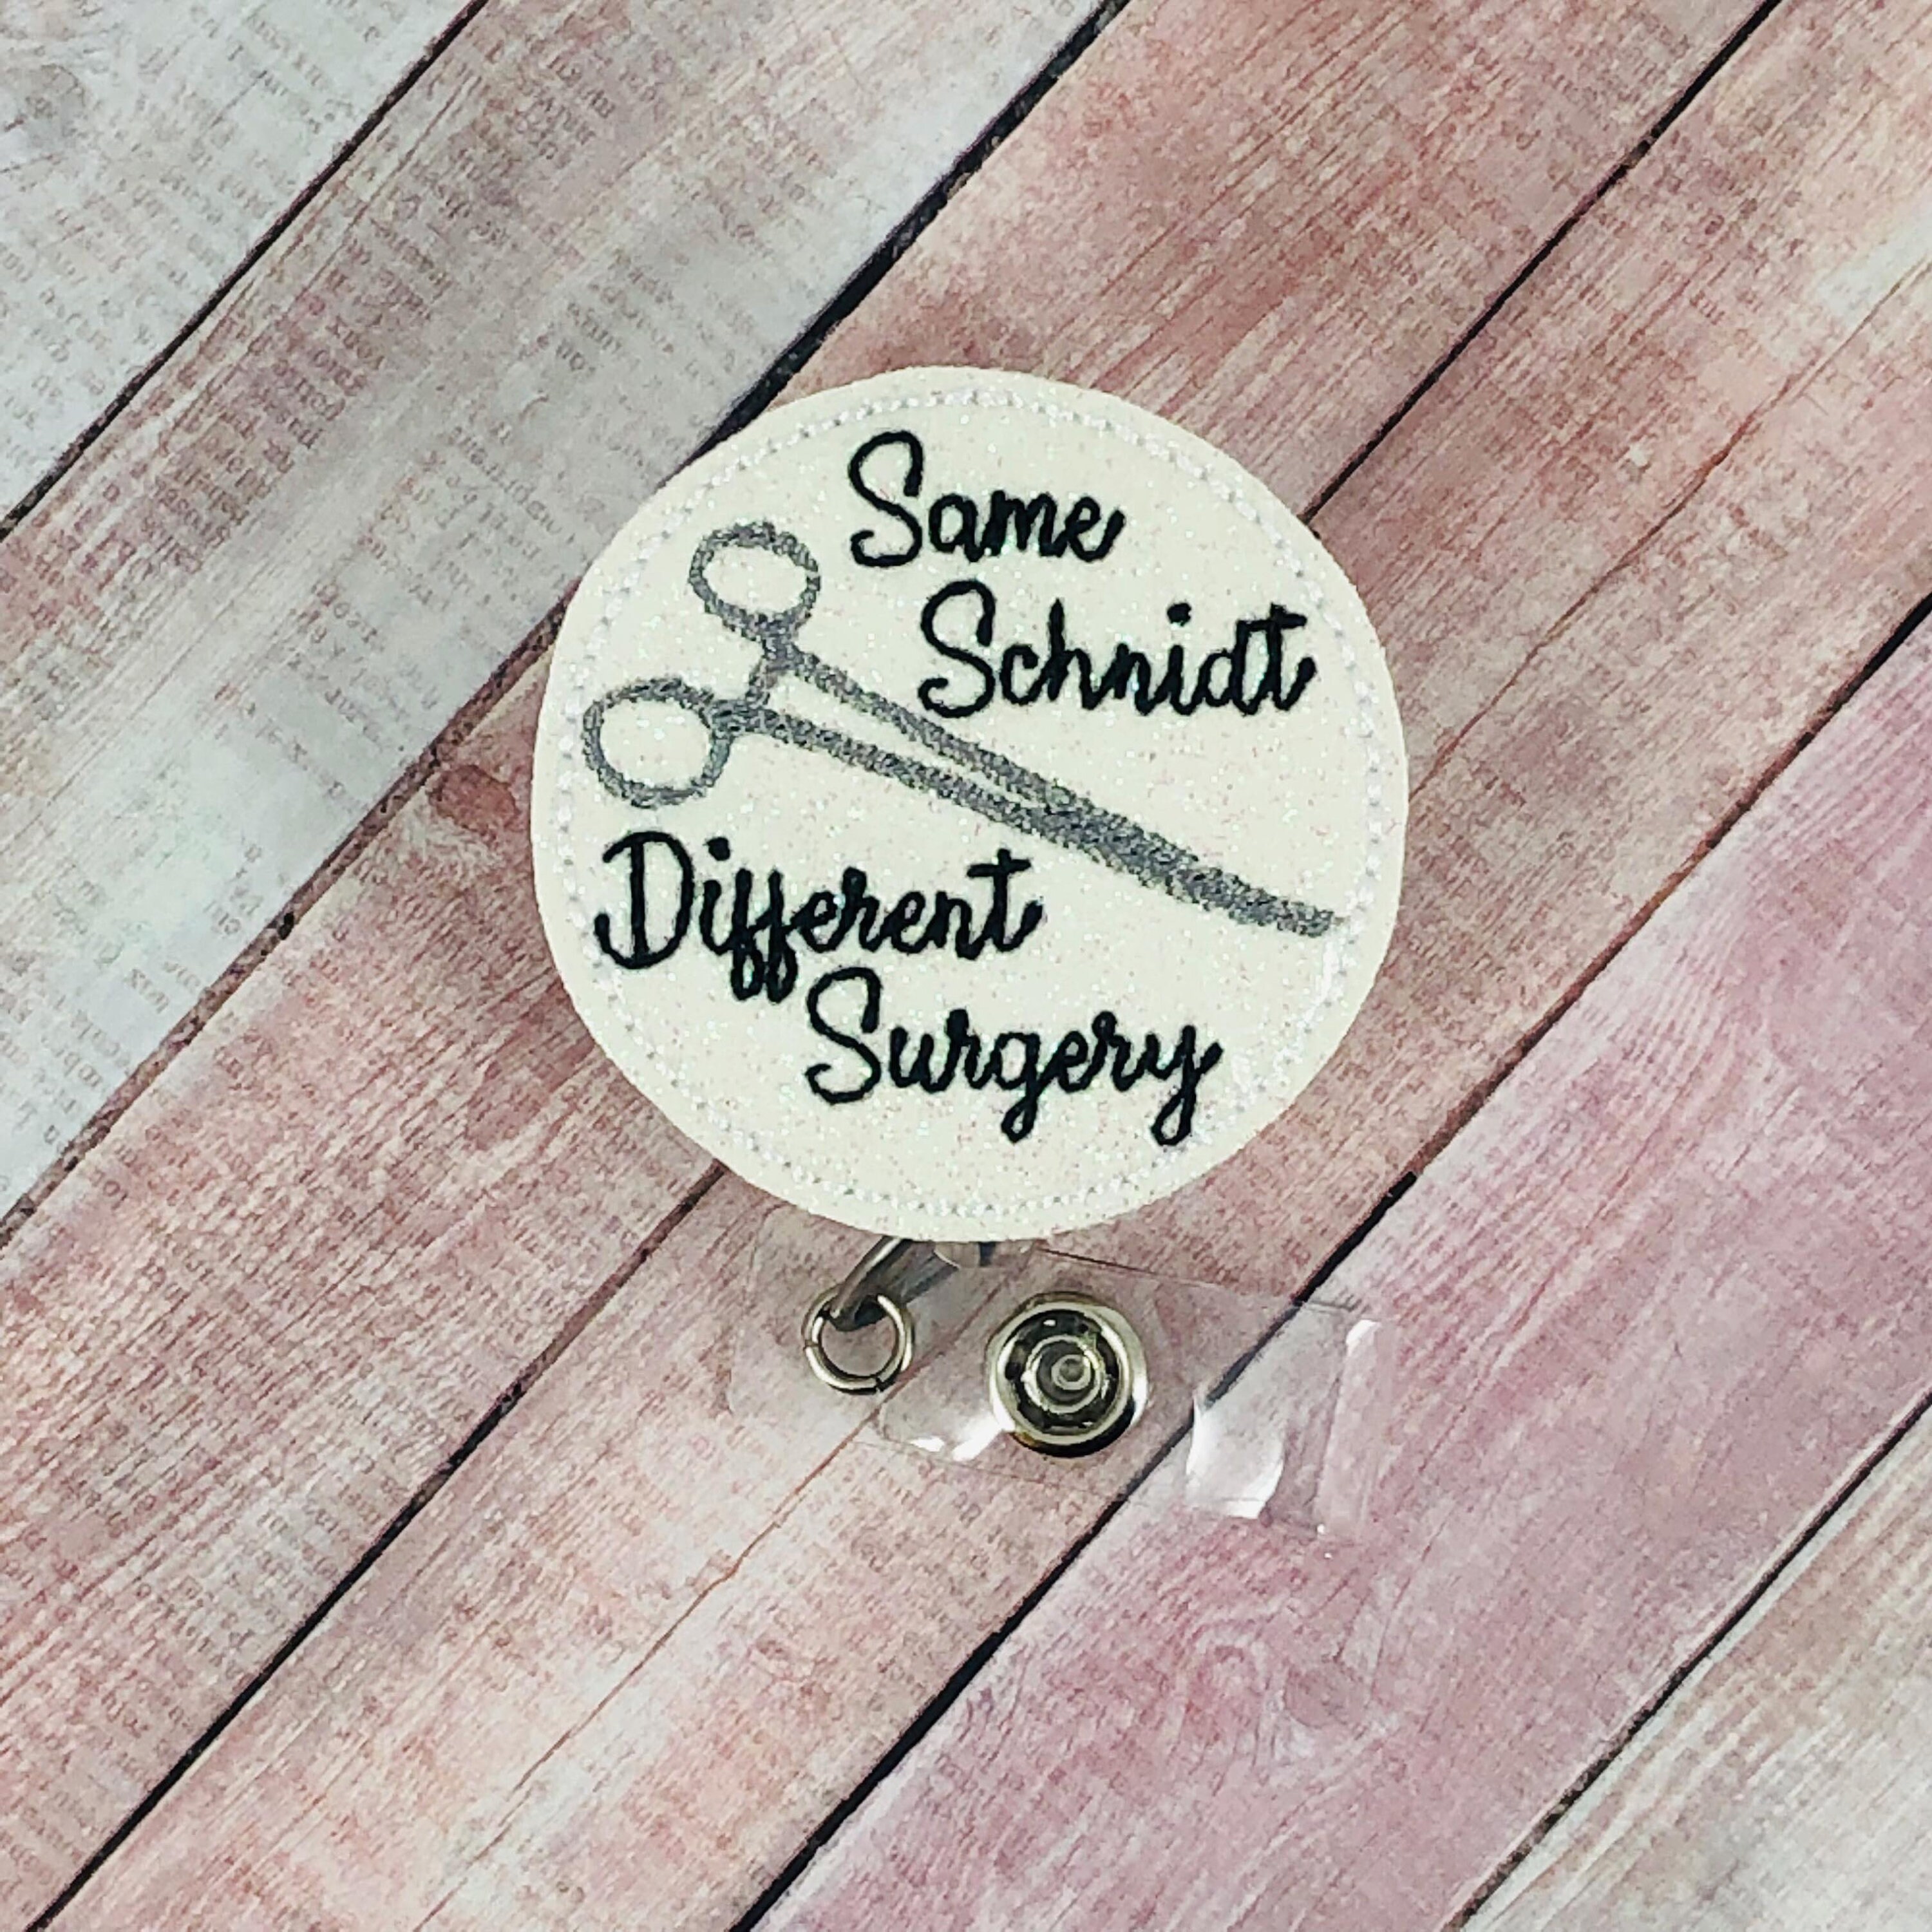 Same Schnidt, Different Surgery Retractable ID Badge Reel • Funny Medical Pun • Surgical Tech Gift • Gifts for CST • Swapfinity